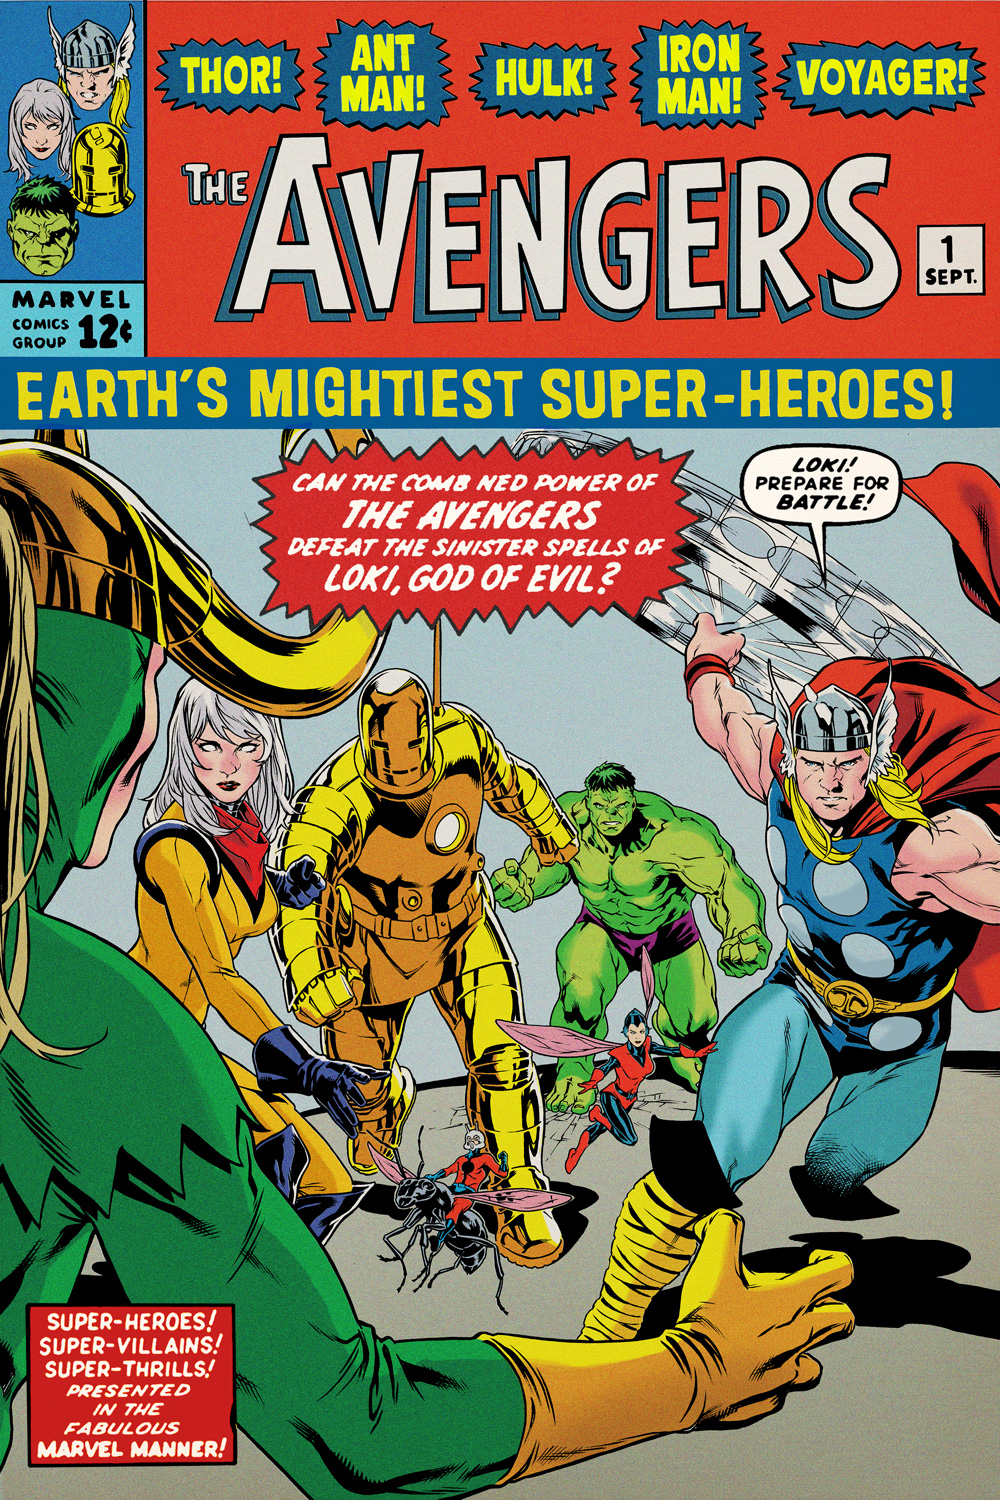 Avengers 675 Launch Parties Herald The Arrival Of